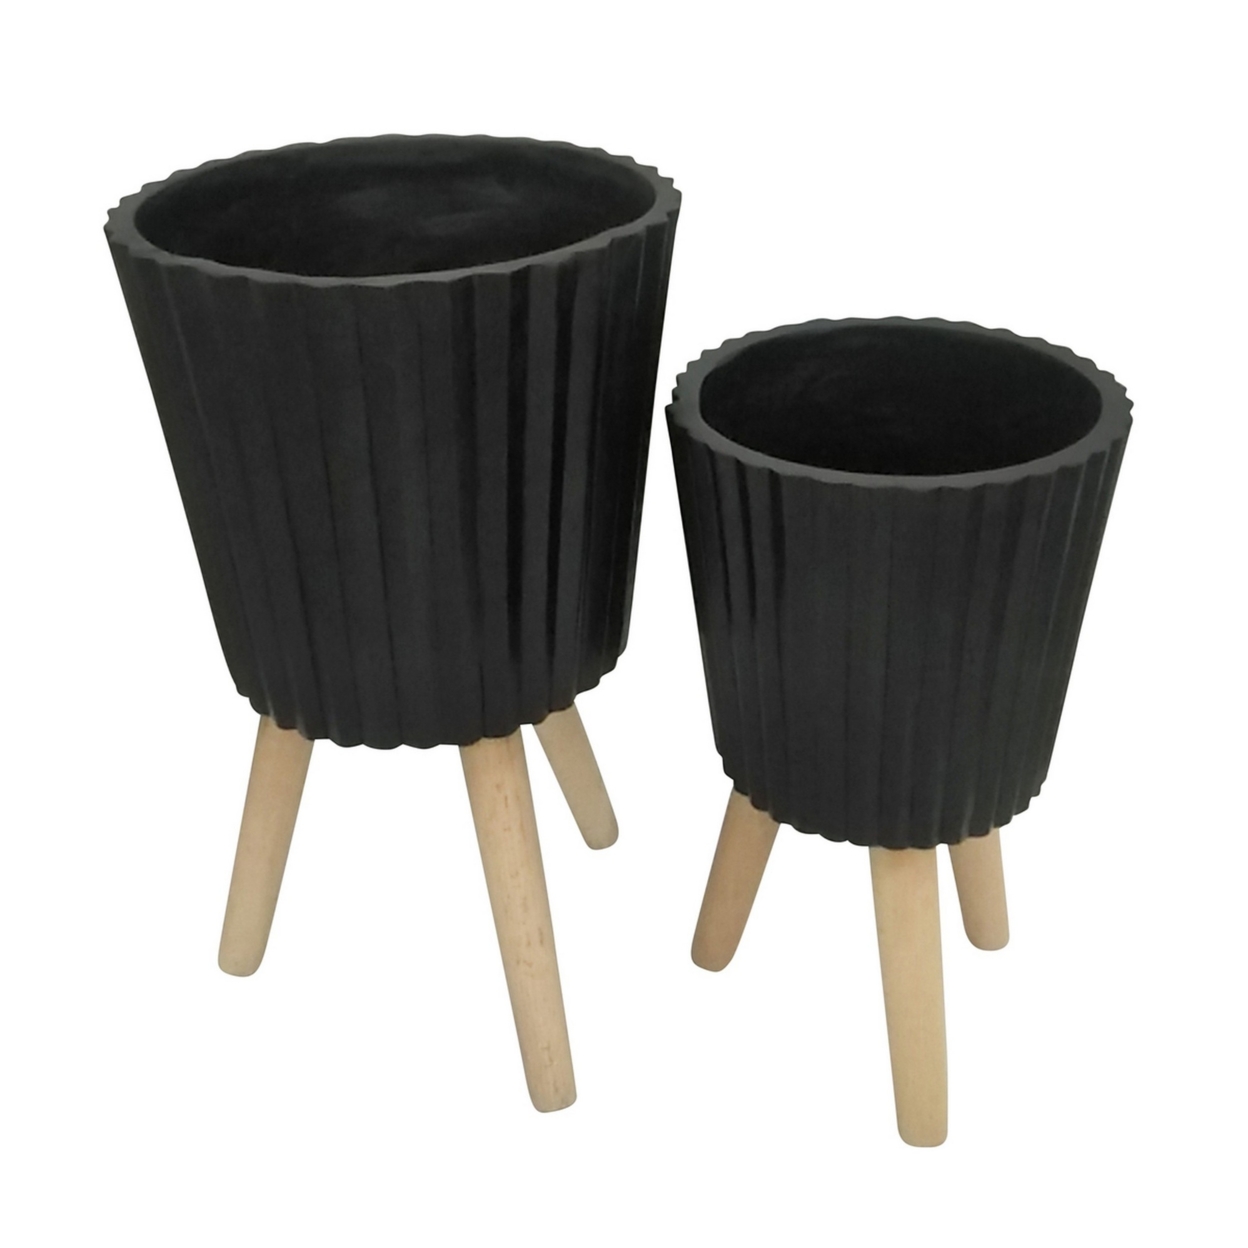 Planter With Ridged Design And Wooden Legs, Set Of 2, Black And Brown- Saltoro Sherpi